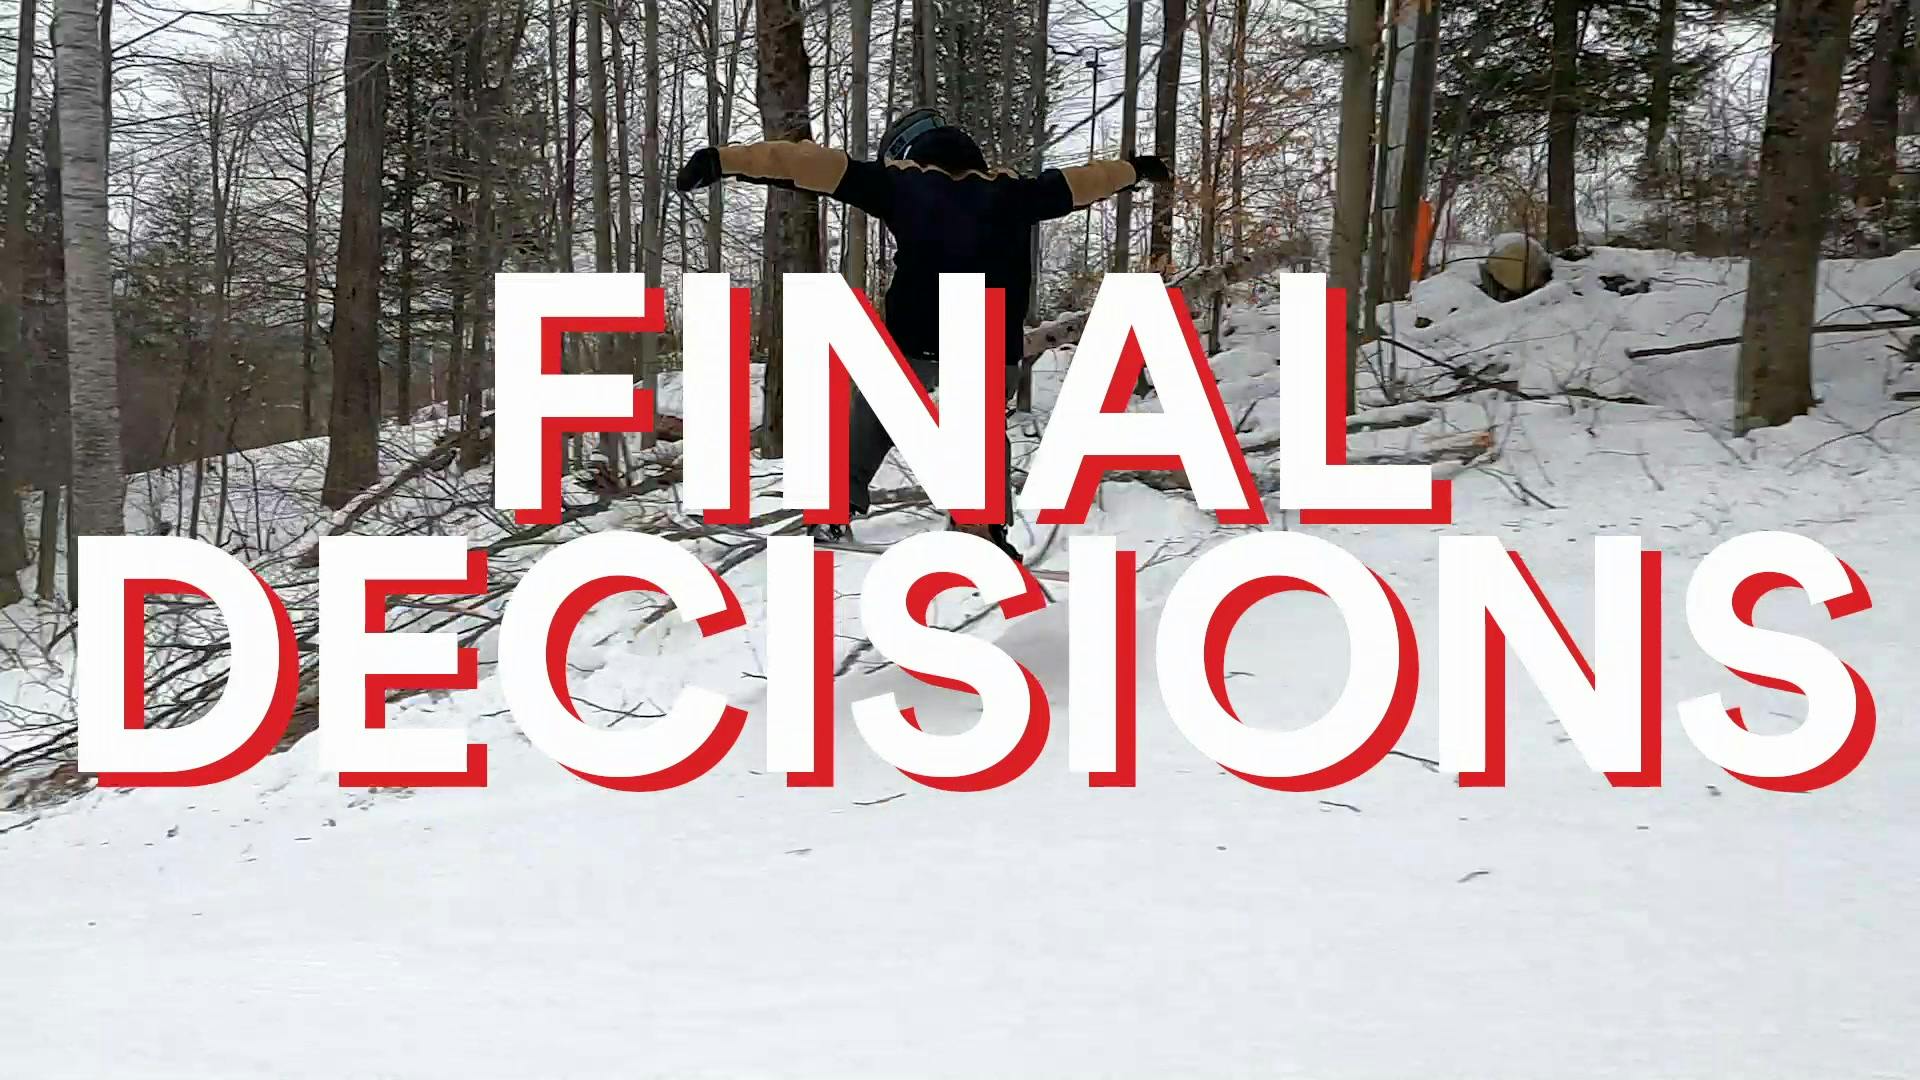 Curated expert Colby Henderson executing a jump with his snowboard with a "Final Decisions" graphic over the image